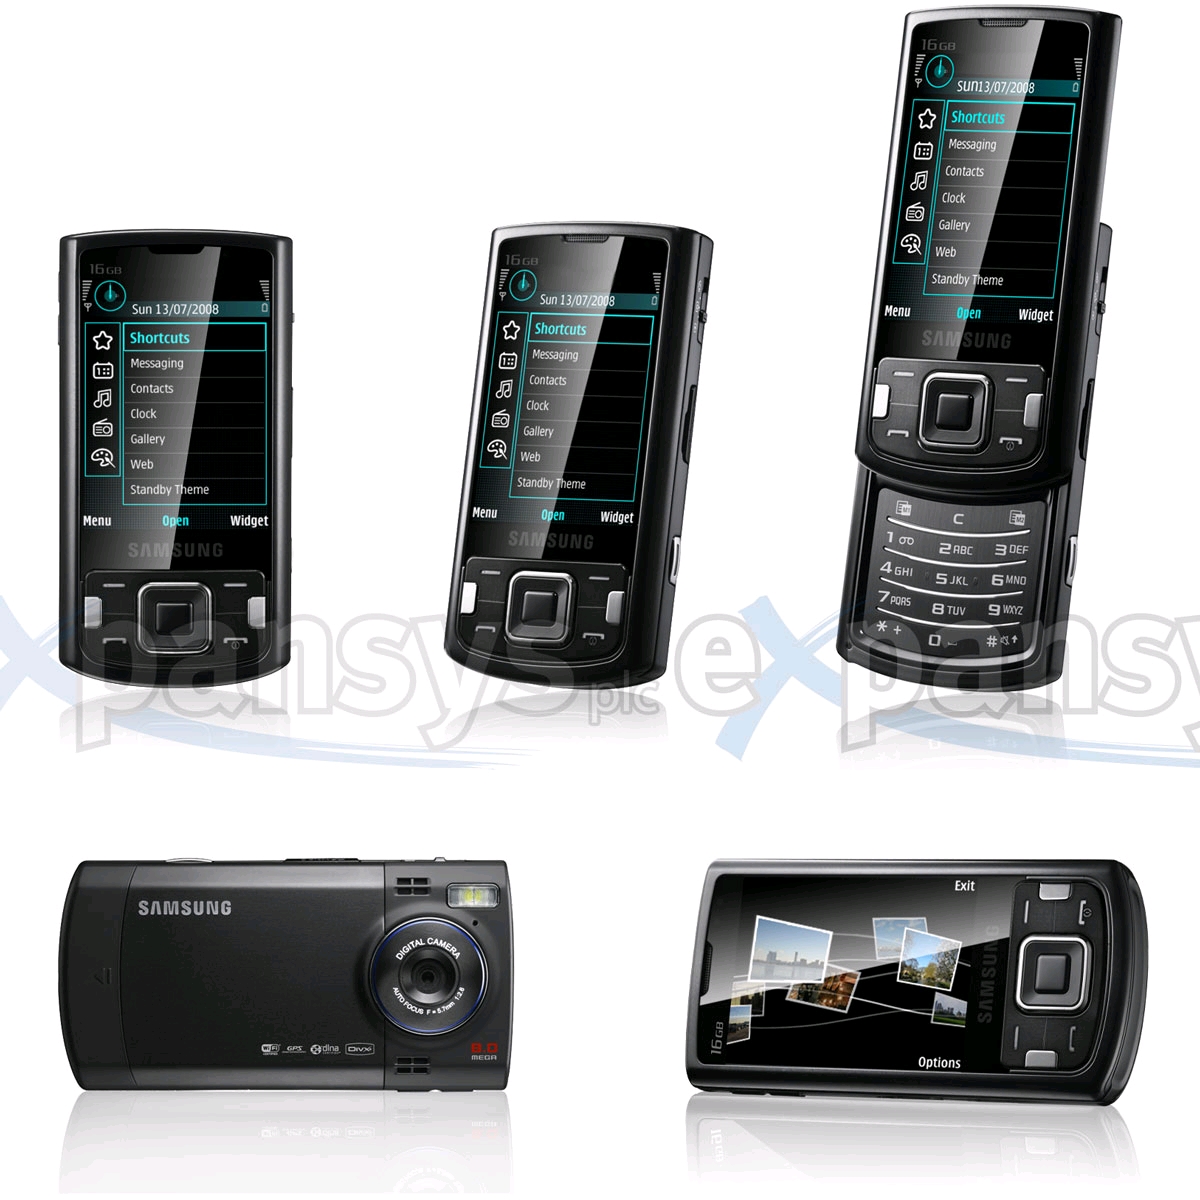 samsung i8510 related images 1 to 50   Zuoda Images